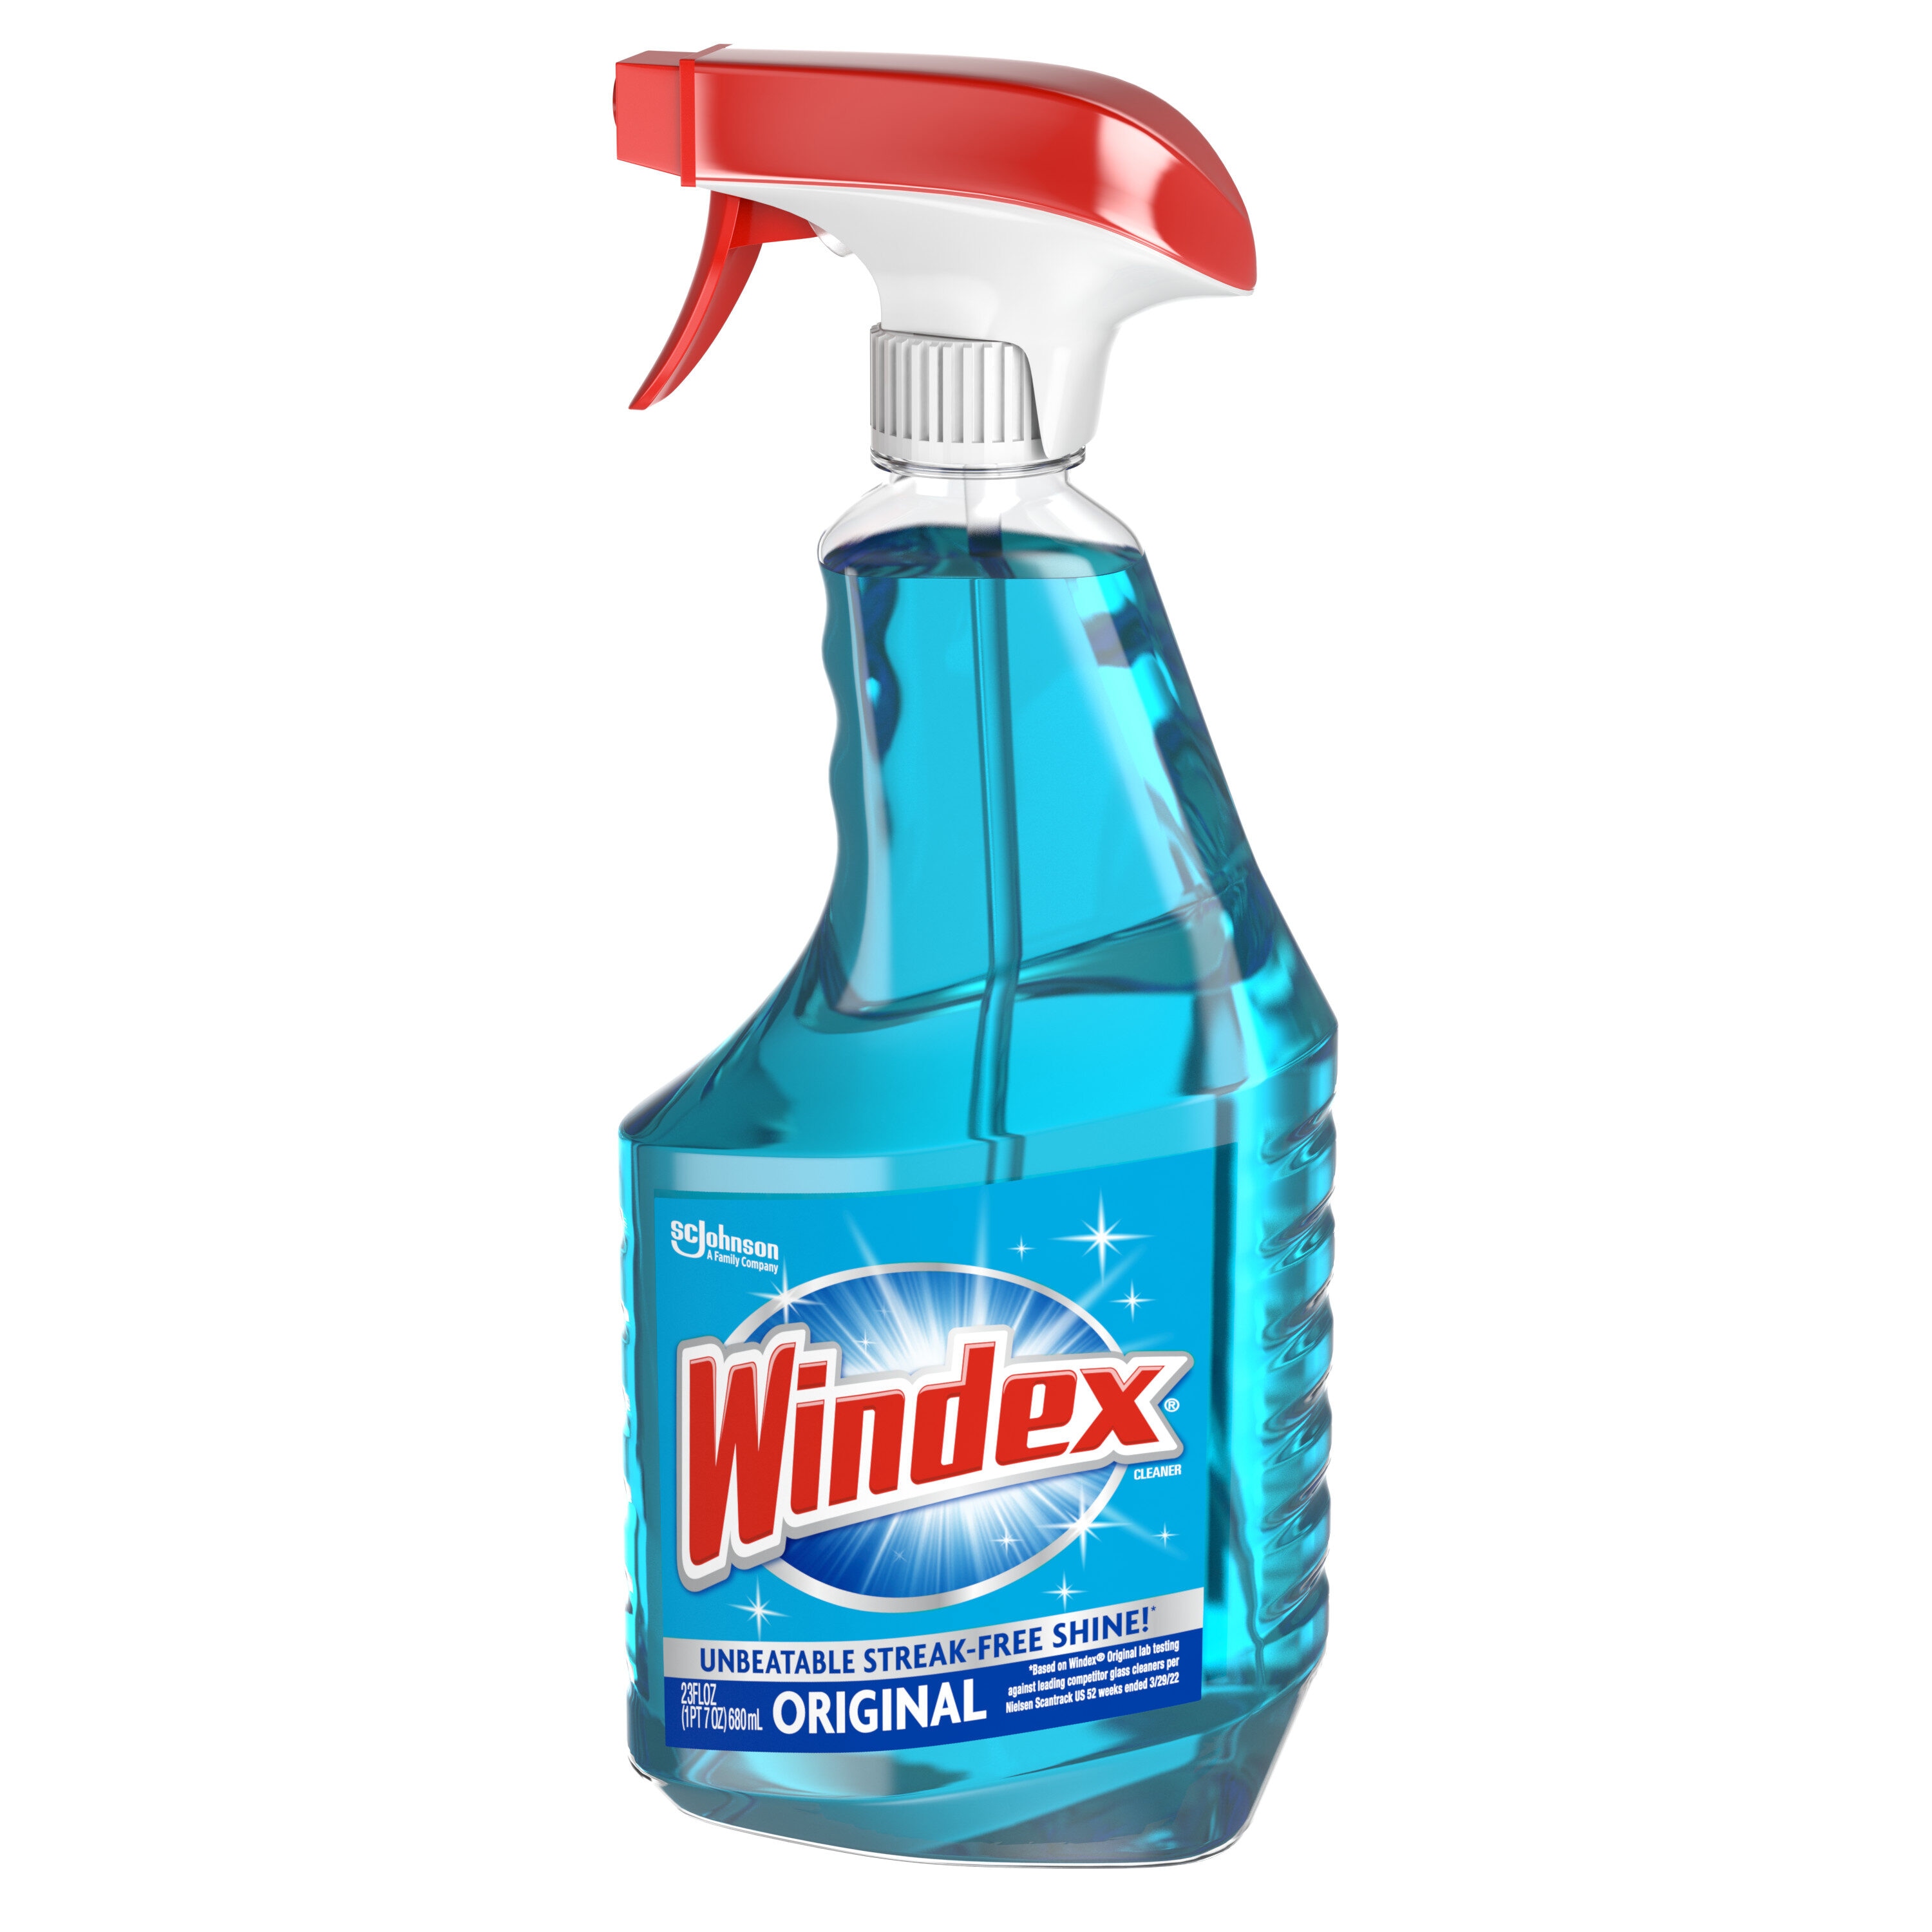 Windex 38-Count Wipes Glass Cleaner in the Glass Cleaners